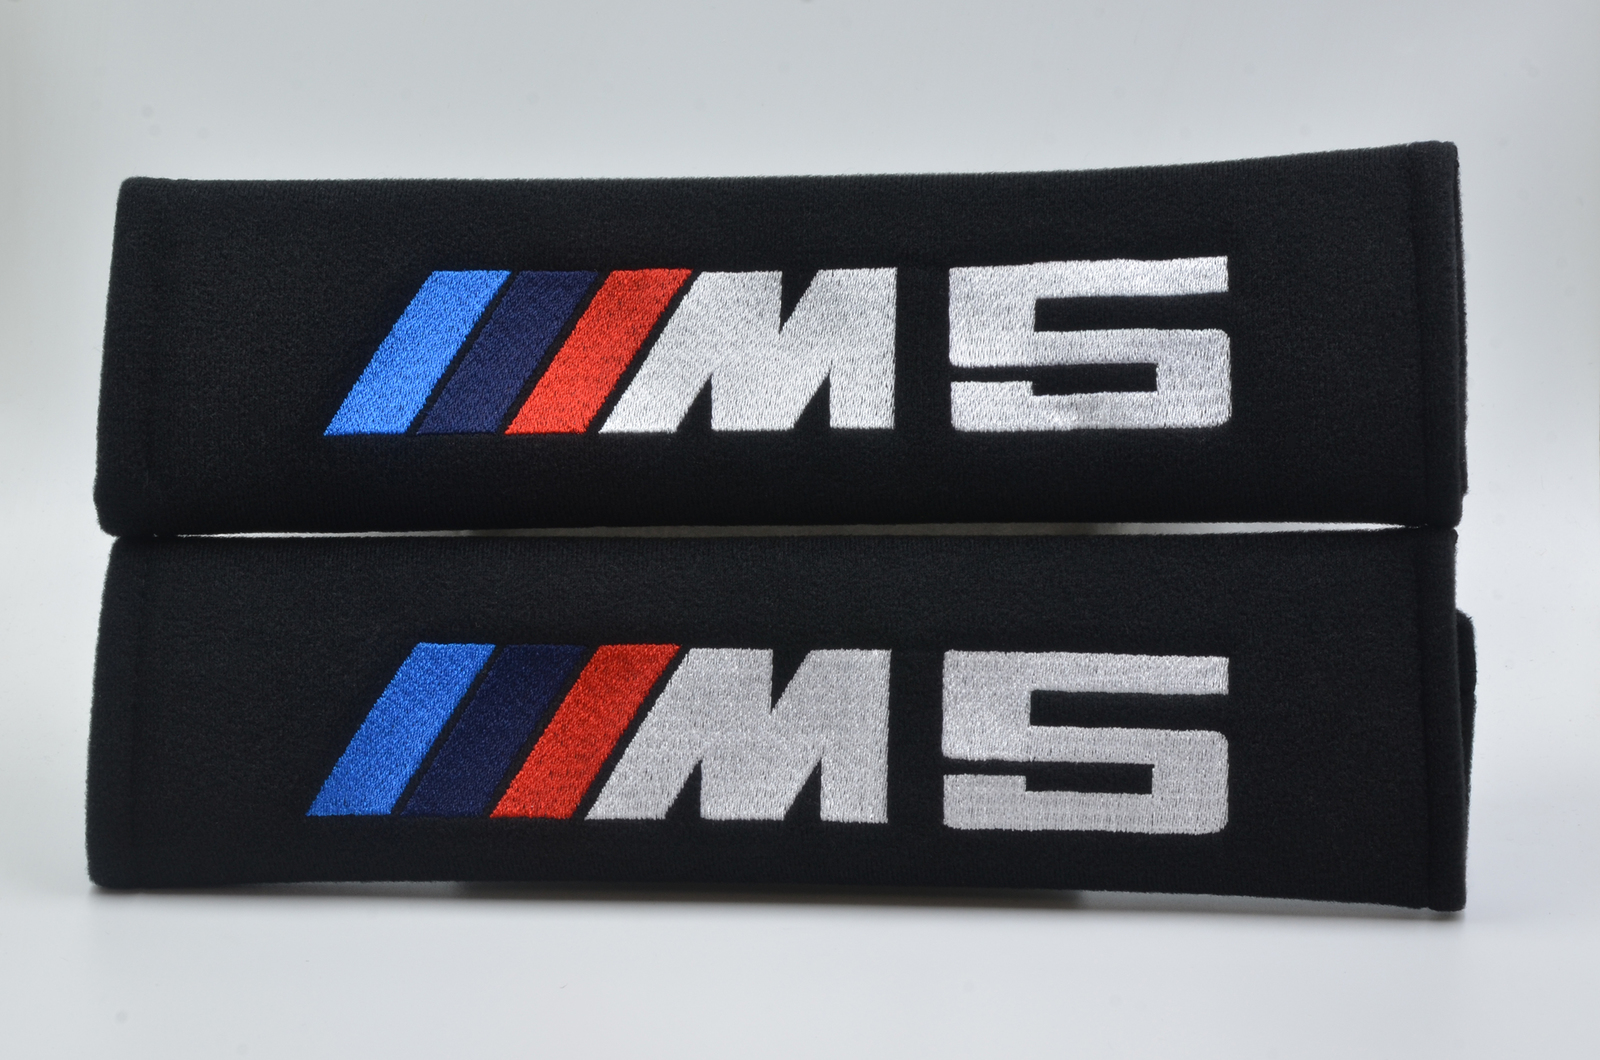 2 pieces (1 PAIR) BMW M5 Embroidery Seat Belt Cover Pads (Black pads) - $16.99